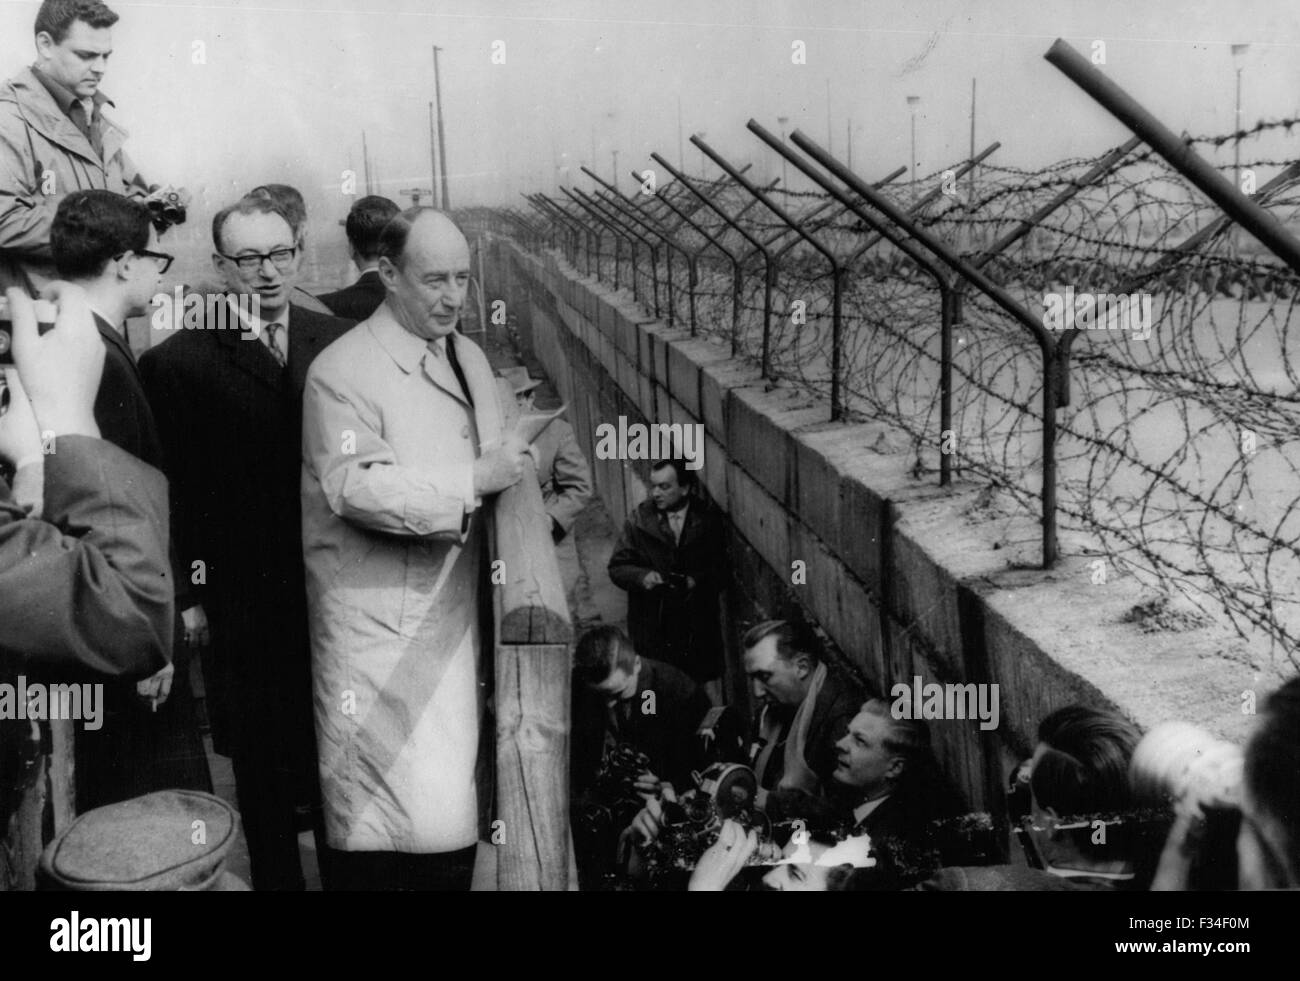 Dec. 26, 1976 - Adlai Stevenson In Berlin: Mr. Adlai Stevenson, the Chief U.S. delegate to the United Nations is on a visit to West Berlin. Photo Shows Mr. Adlai Stevenson looks over the Berlin Wall in the Potsdam Place today. © Keystone Pictures USA/ZUMAPRESS.com/Alamy Live News Stock Photo